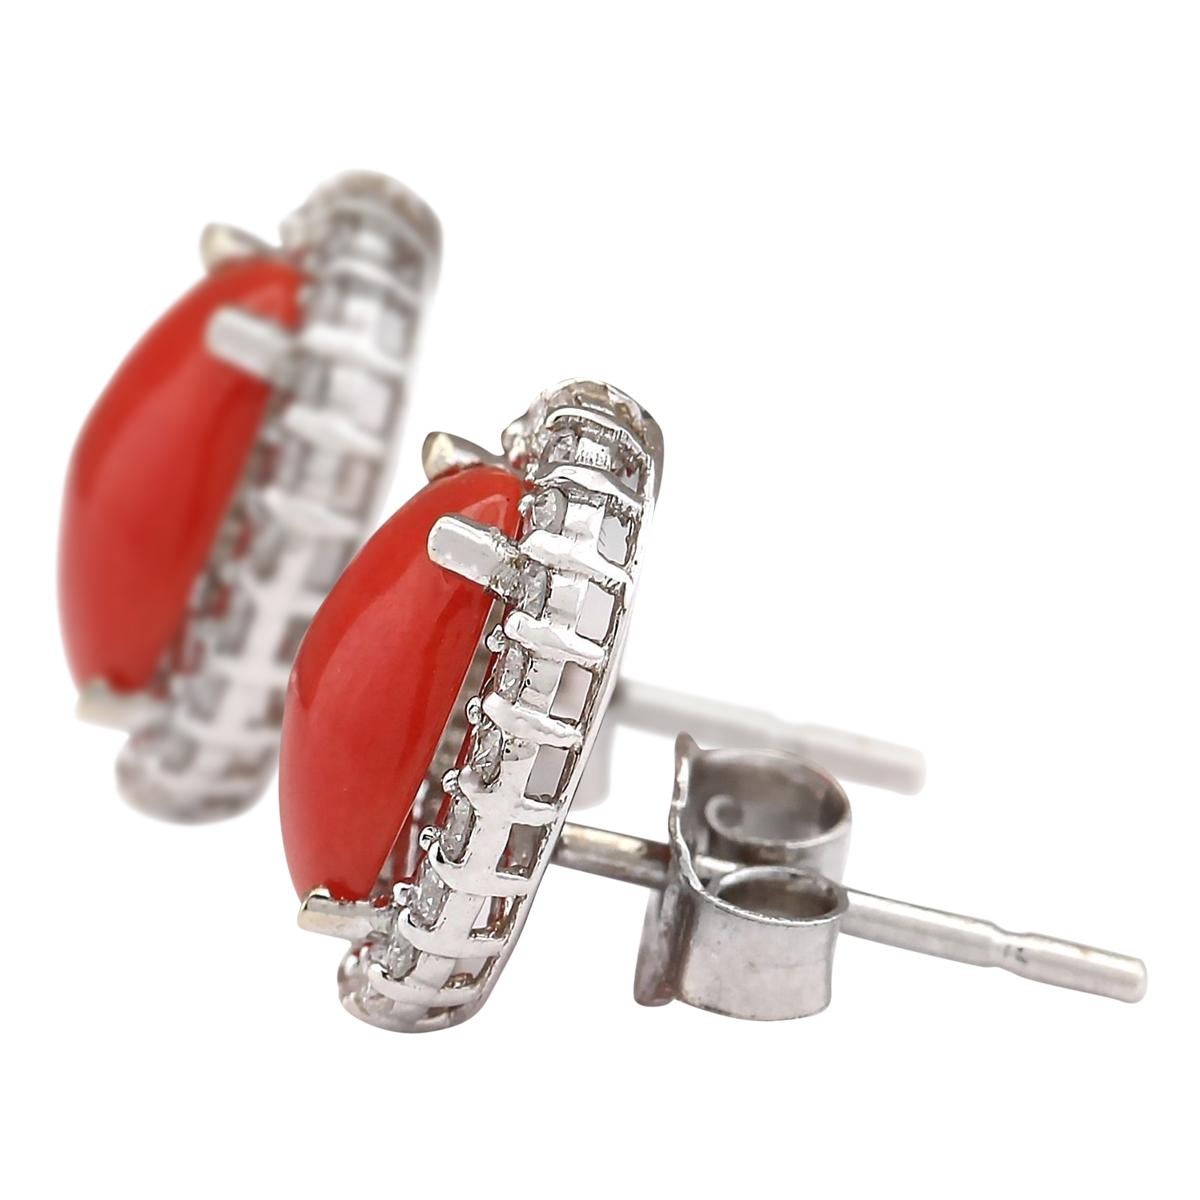 Stamped: 14K White Gold
Total Earrings Weight: 2.2 Grams
Total Natural Coral Weight is 2.30 Carat (Measures: 8.00x6.00 mm)
Color: Red
Total Natural Diamond Weight is 0.65 Carat
Color: F-G, Clarity: VS2-SI1
Face Measures: 12.10x10.10 mm
Sku: [703713W]